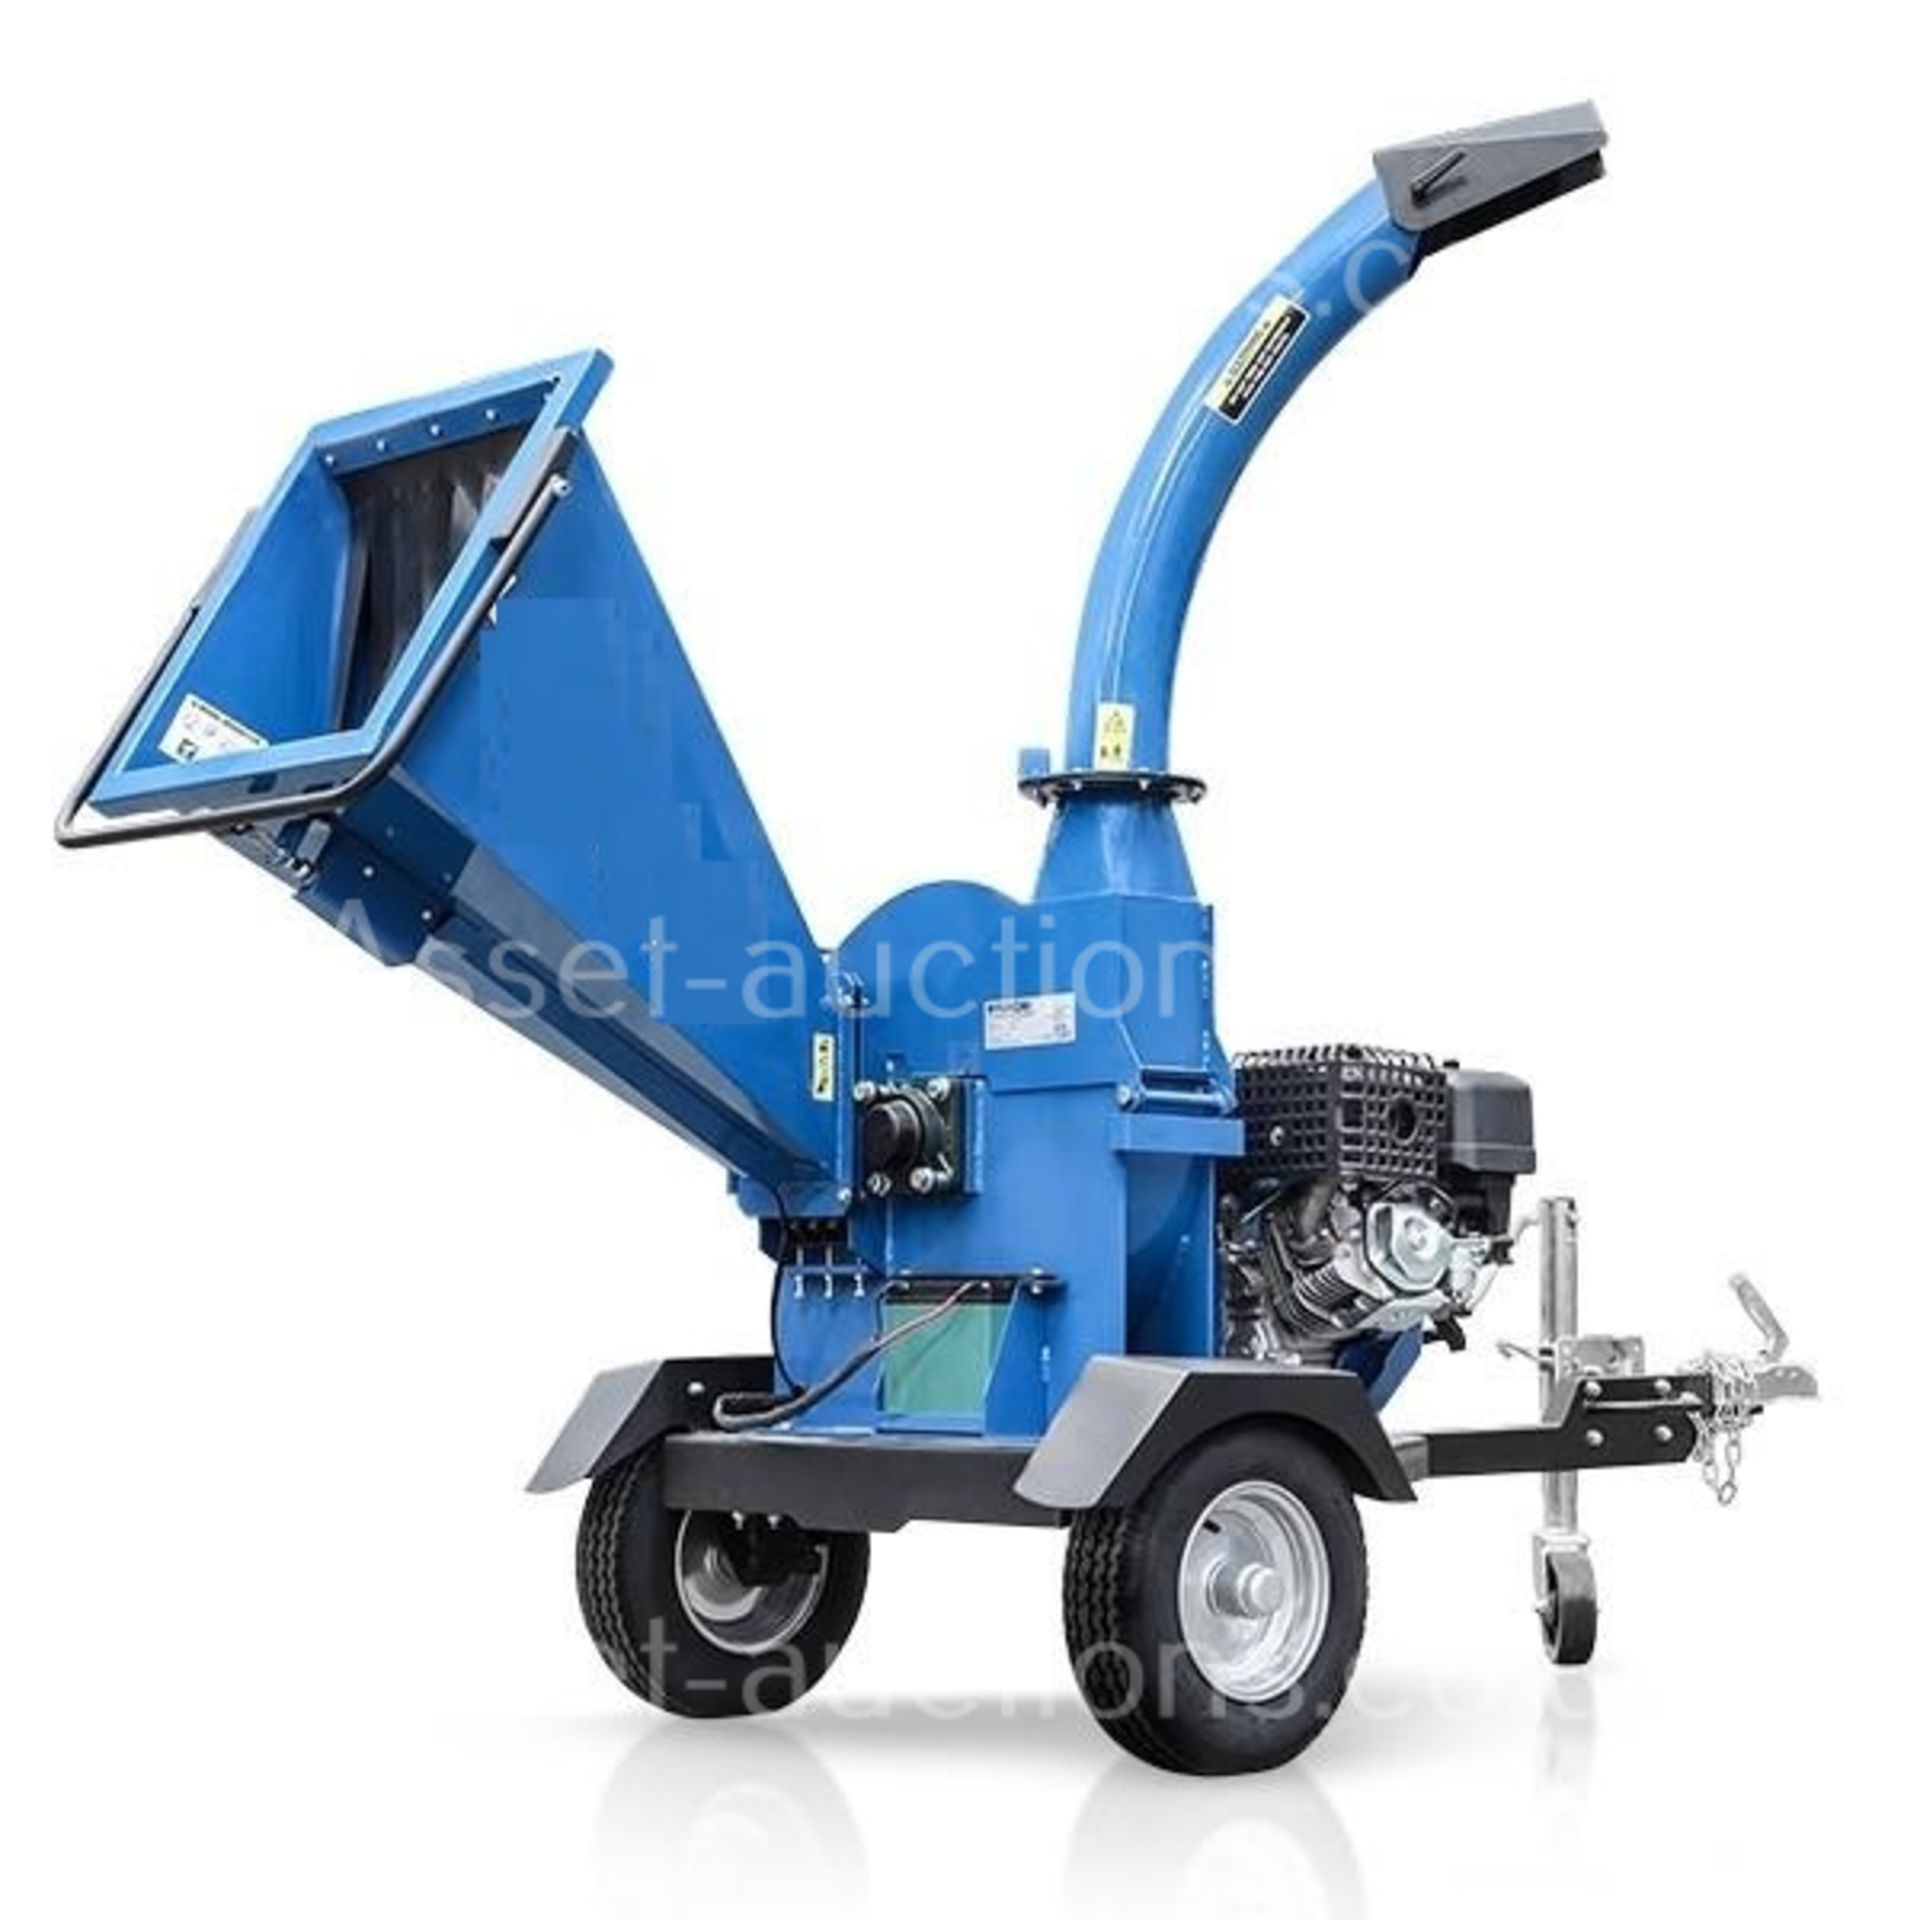 NEW AND UNUSED 15100TE 420cc 4.5" TOWABLE PETROL WOOD CHIPPER, RRP OVER £2400 *PLUS VAT* - Image 7 of 10